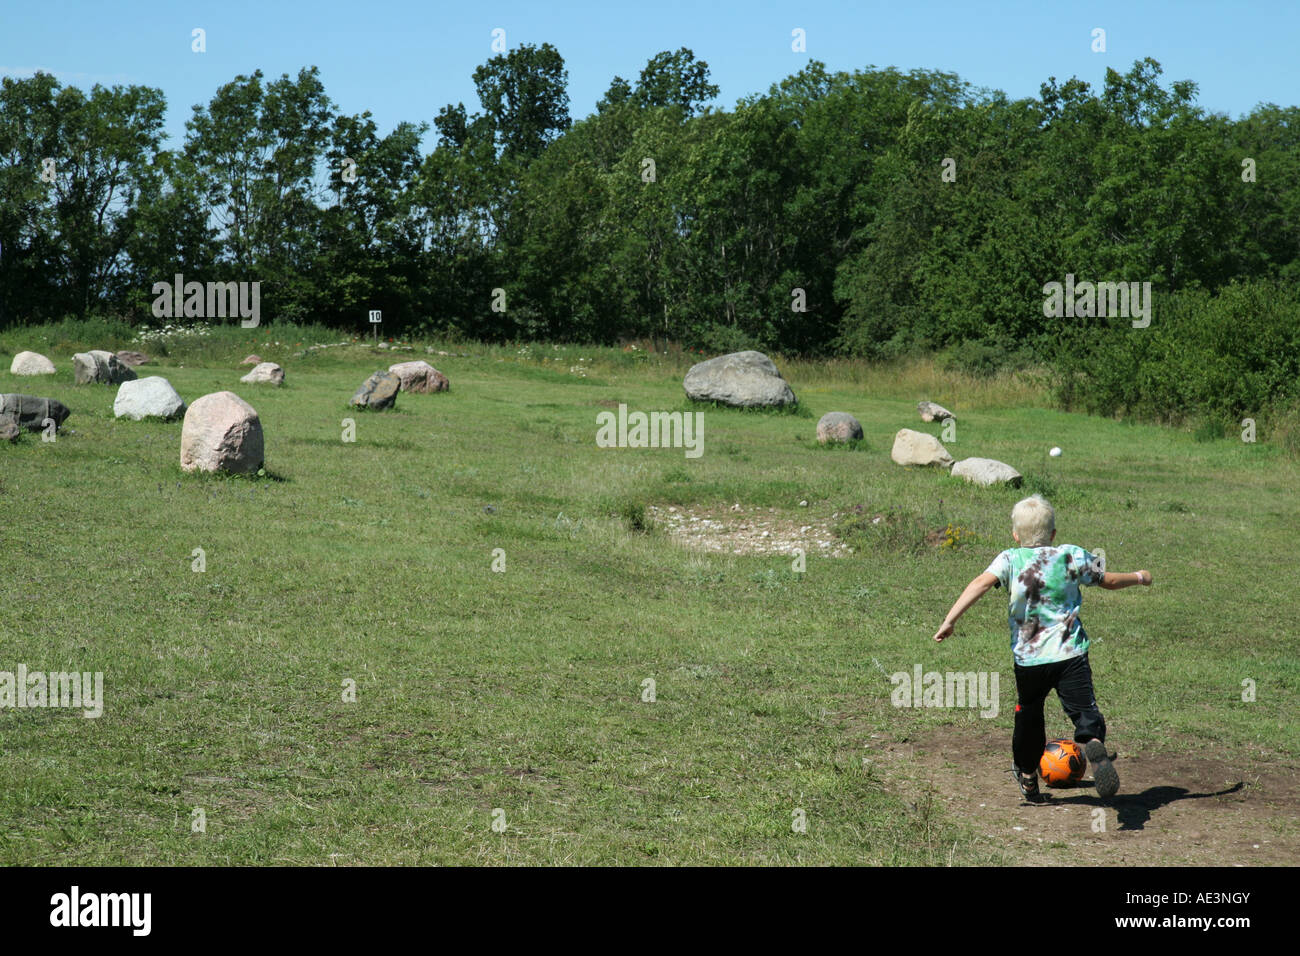 Playing football golf by kicking a football around an 18 hole course with different kinds of obstacles Stock Photo